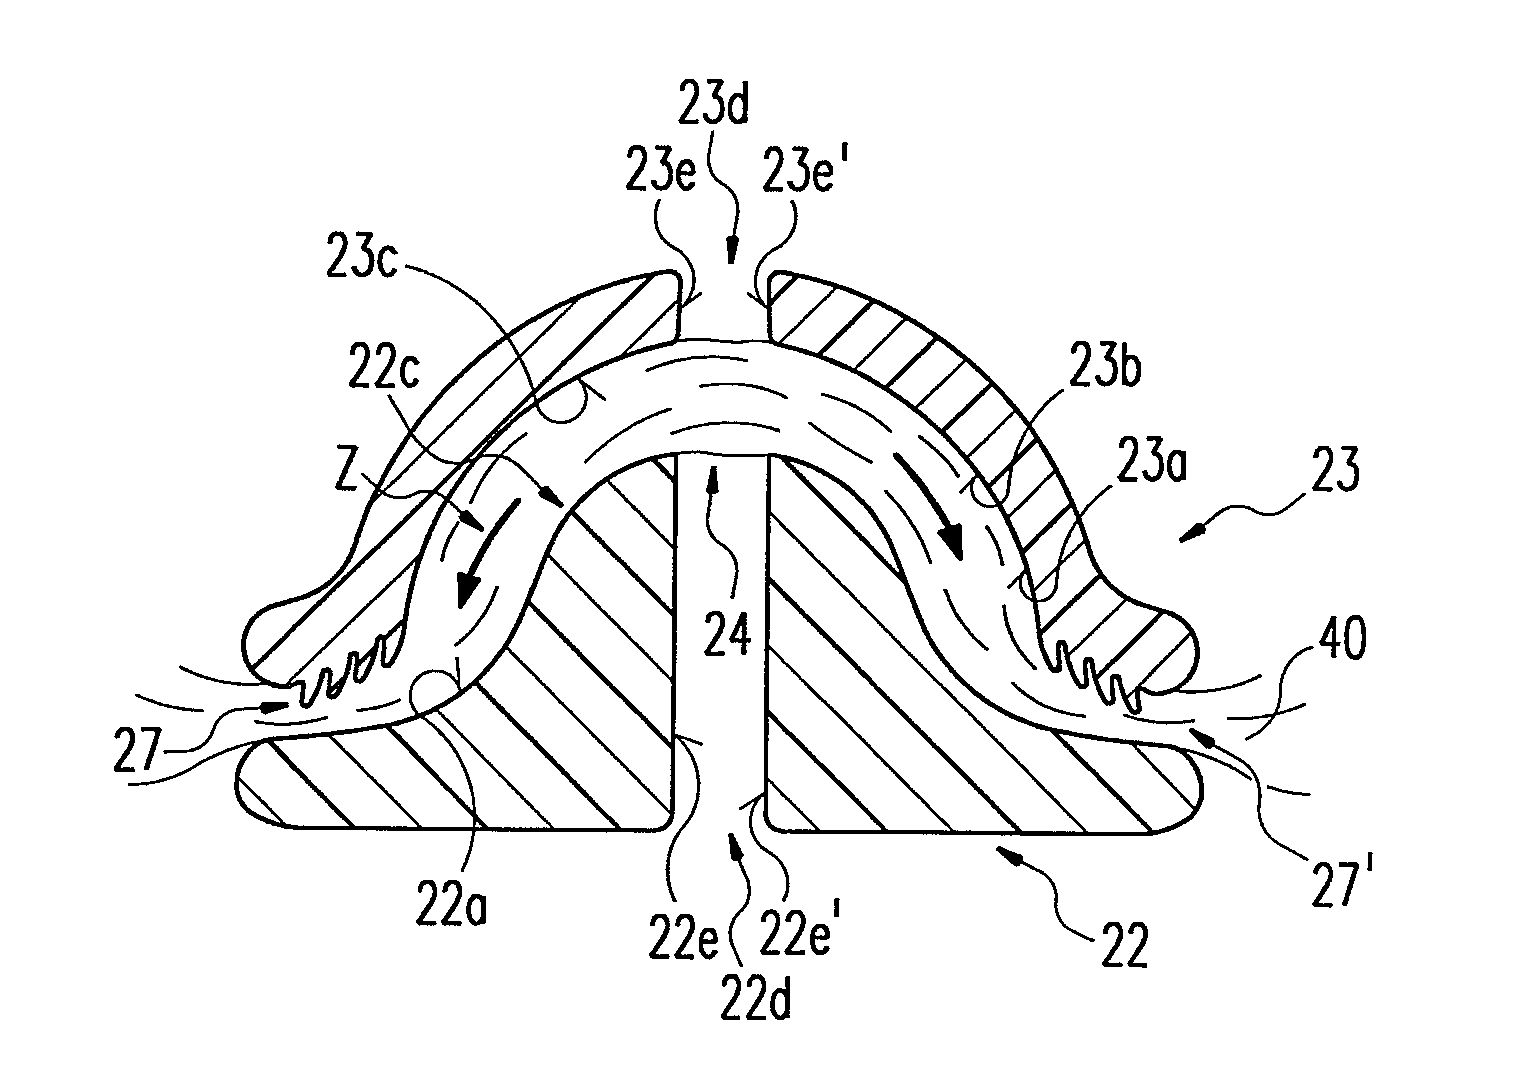 Electrosurgical instrument with opposing jaws, central knife, and barbs for maintaining clamping tension on tissue even after opening jaws